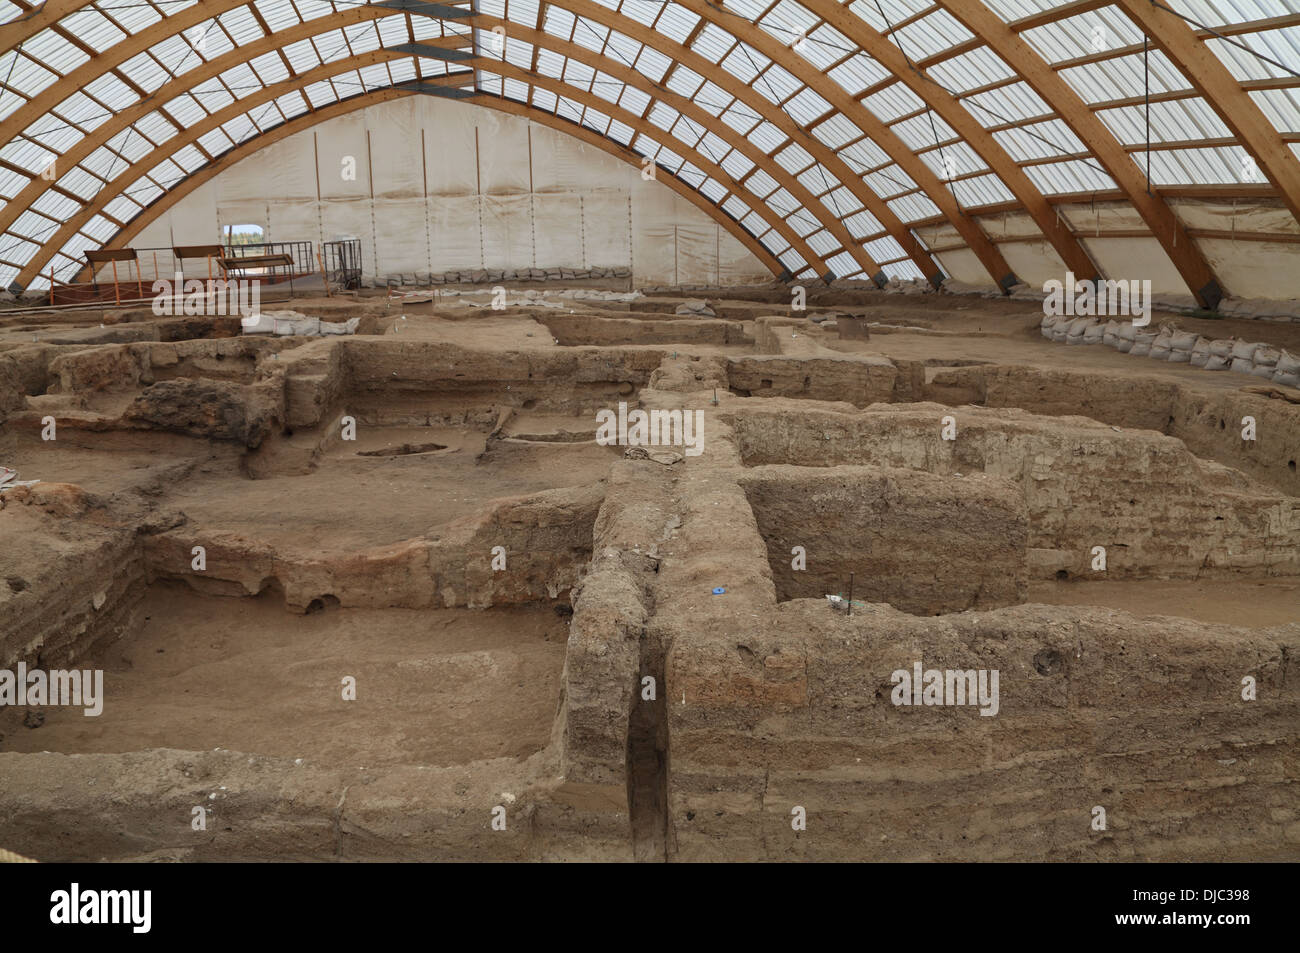 Catalhoyuk early neolithic site showing room divisions dating from 9,500 years, Cumra, Konya, central Turkey Stock Photo